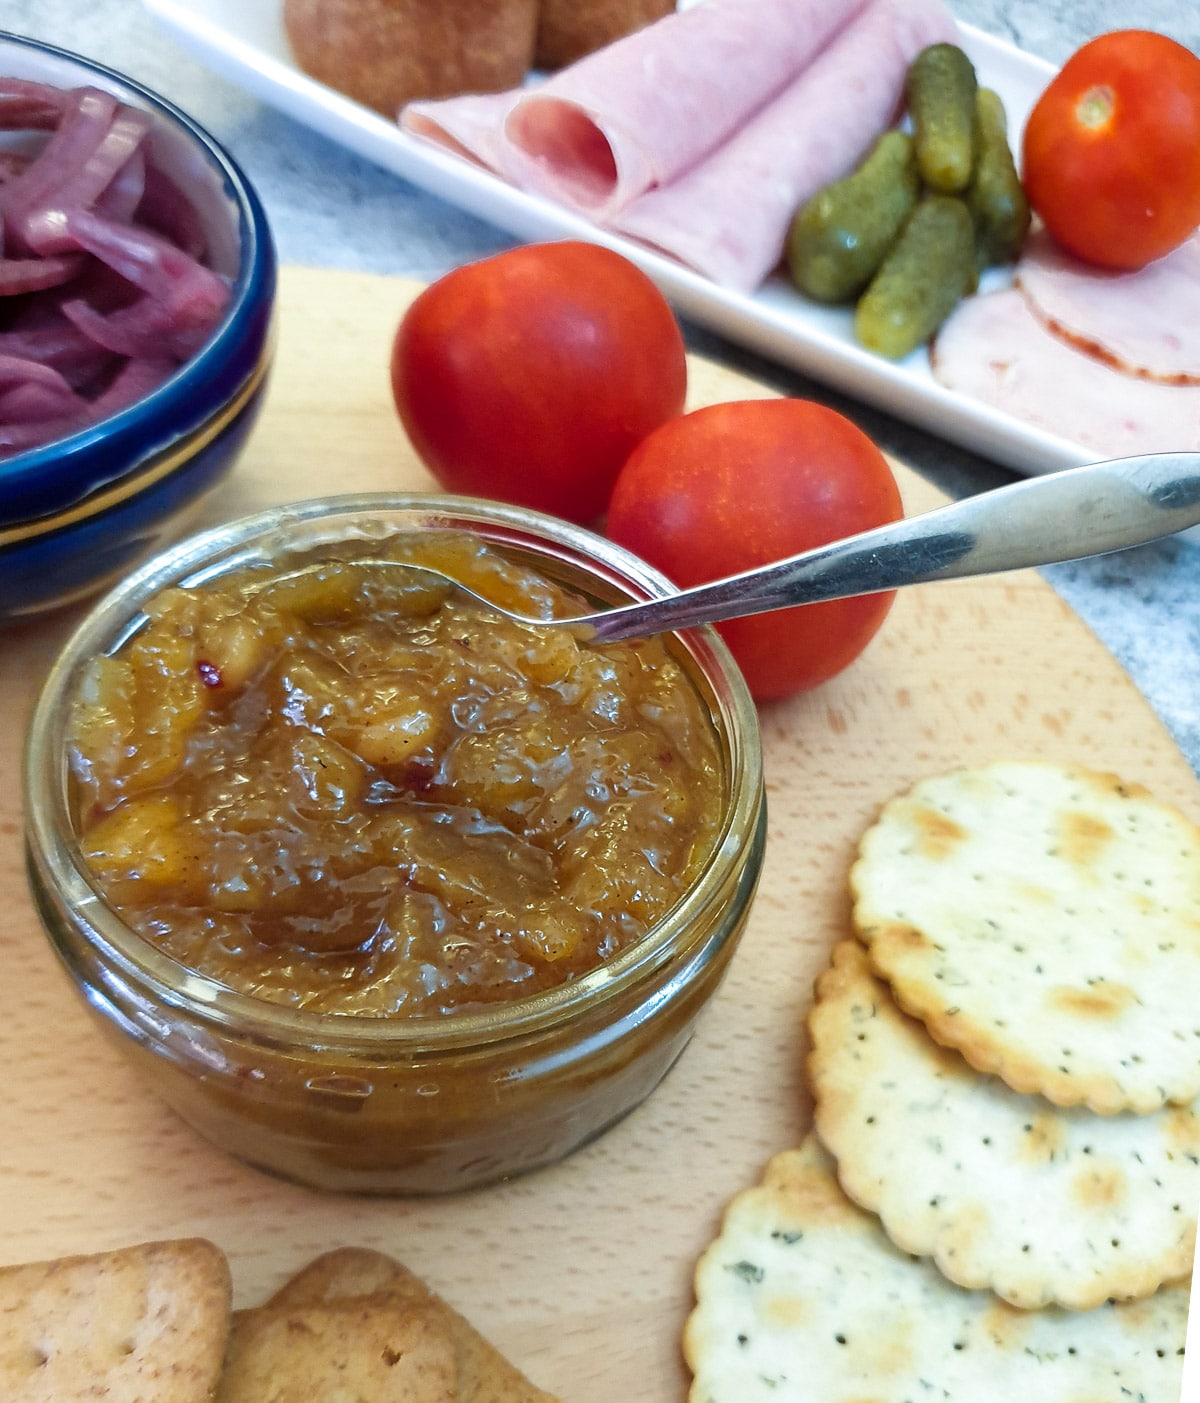 A dish of mango chutney on a wooden board, surrounded by cold meat slices, tomatoes and crackers.